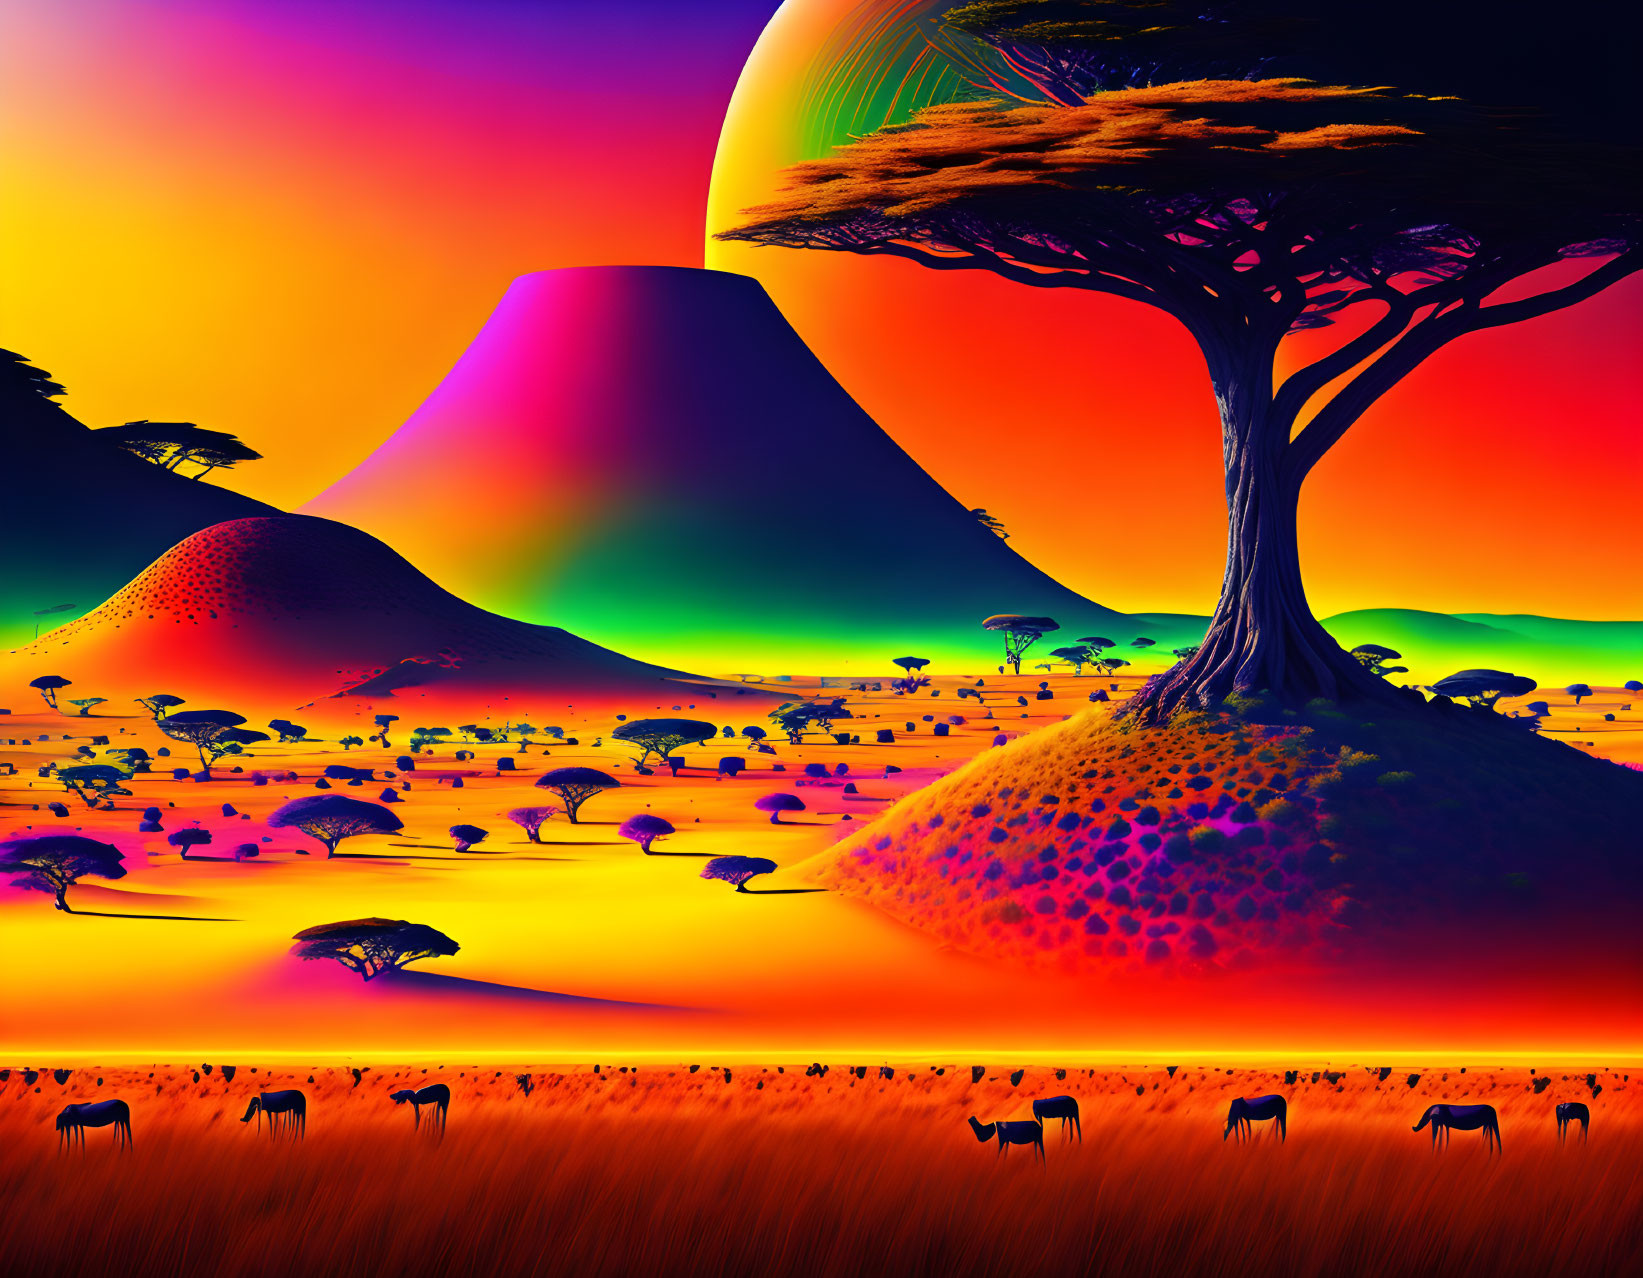 Vibrant multicolored sky over surreal landscape with large tree and antelope-like animals